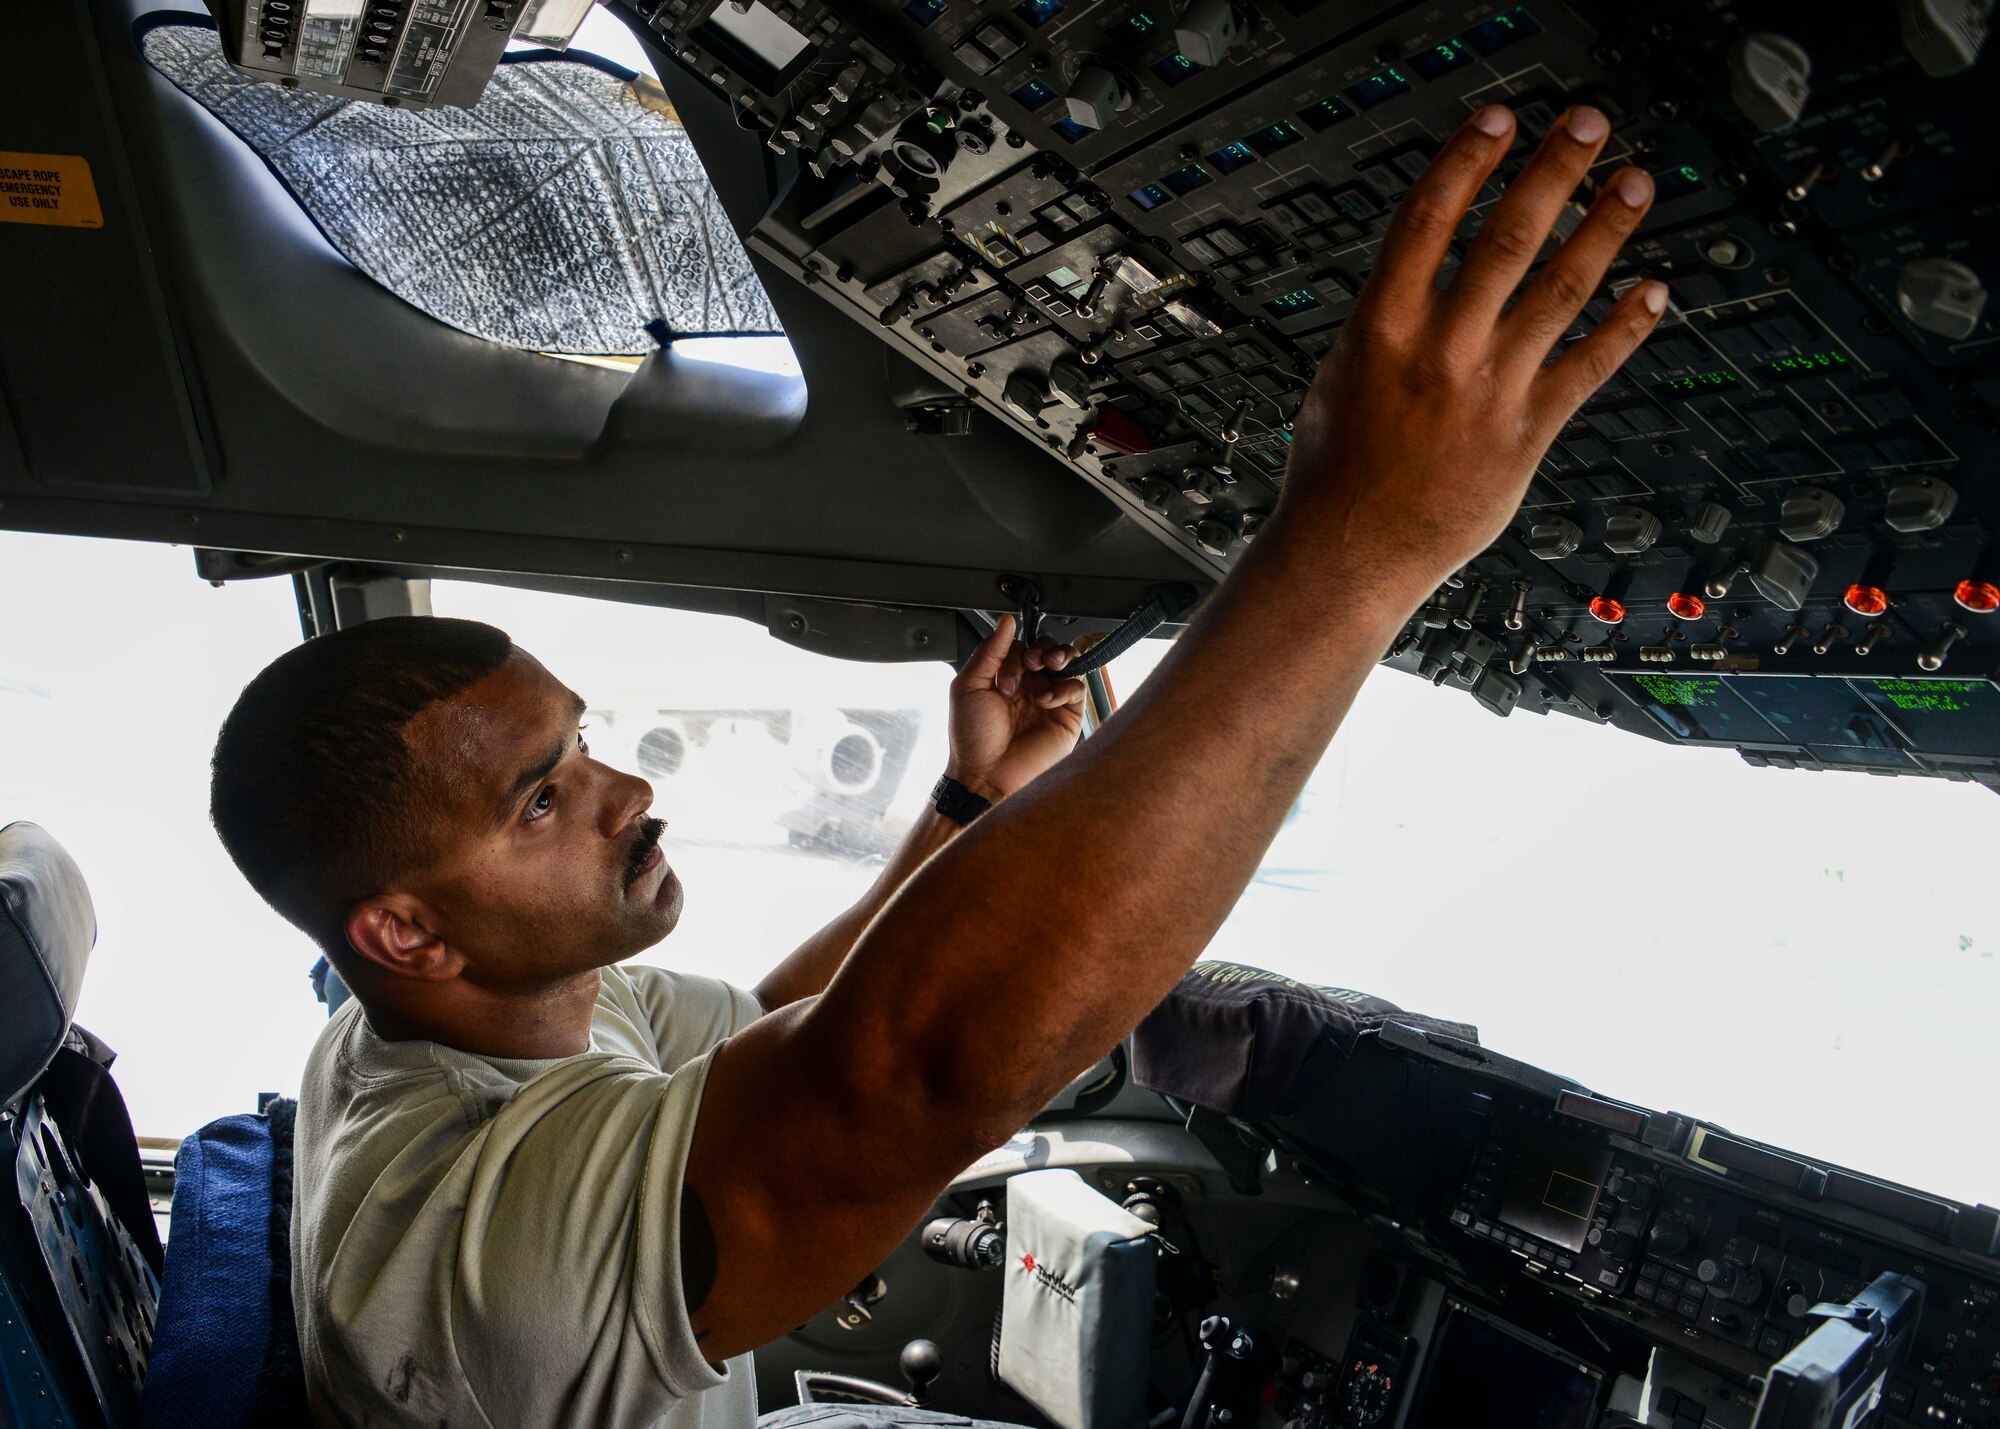 Staff Sgt. Benjamin Taylor, 8th Expeditionary Air Mobility Squadron, Aircraft Maintenance Flight instruments and flight controls craftsman, turns on the hydraulics systems during a hydraulic preflight inspection on a C-17 Globemaster III June 30, 2016, at Al Udeid Air Base, Qatar. MXA Airmen maintain the most technically advanced cargo airlift aircraft in the world as the largest enroute unit in the U.S. Air Forces Central Command area of responsibility. They maintain both C-17 Globemaster III and C-5 Galaxy coming in and out of the base as well as commercial aircraft. (U.S. Air Force photo/Senior Airman Janelle Patiño/Released)